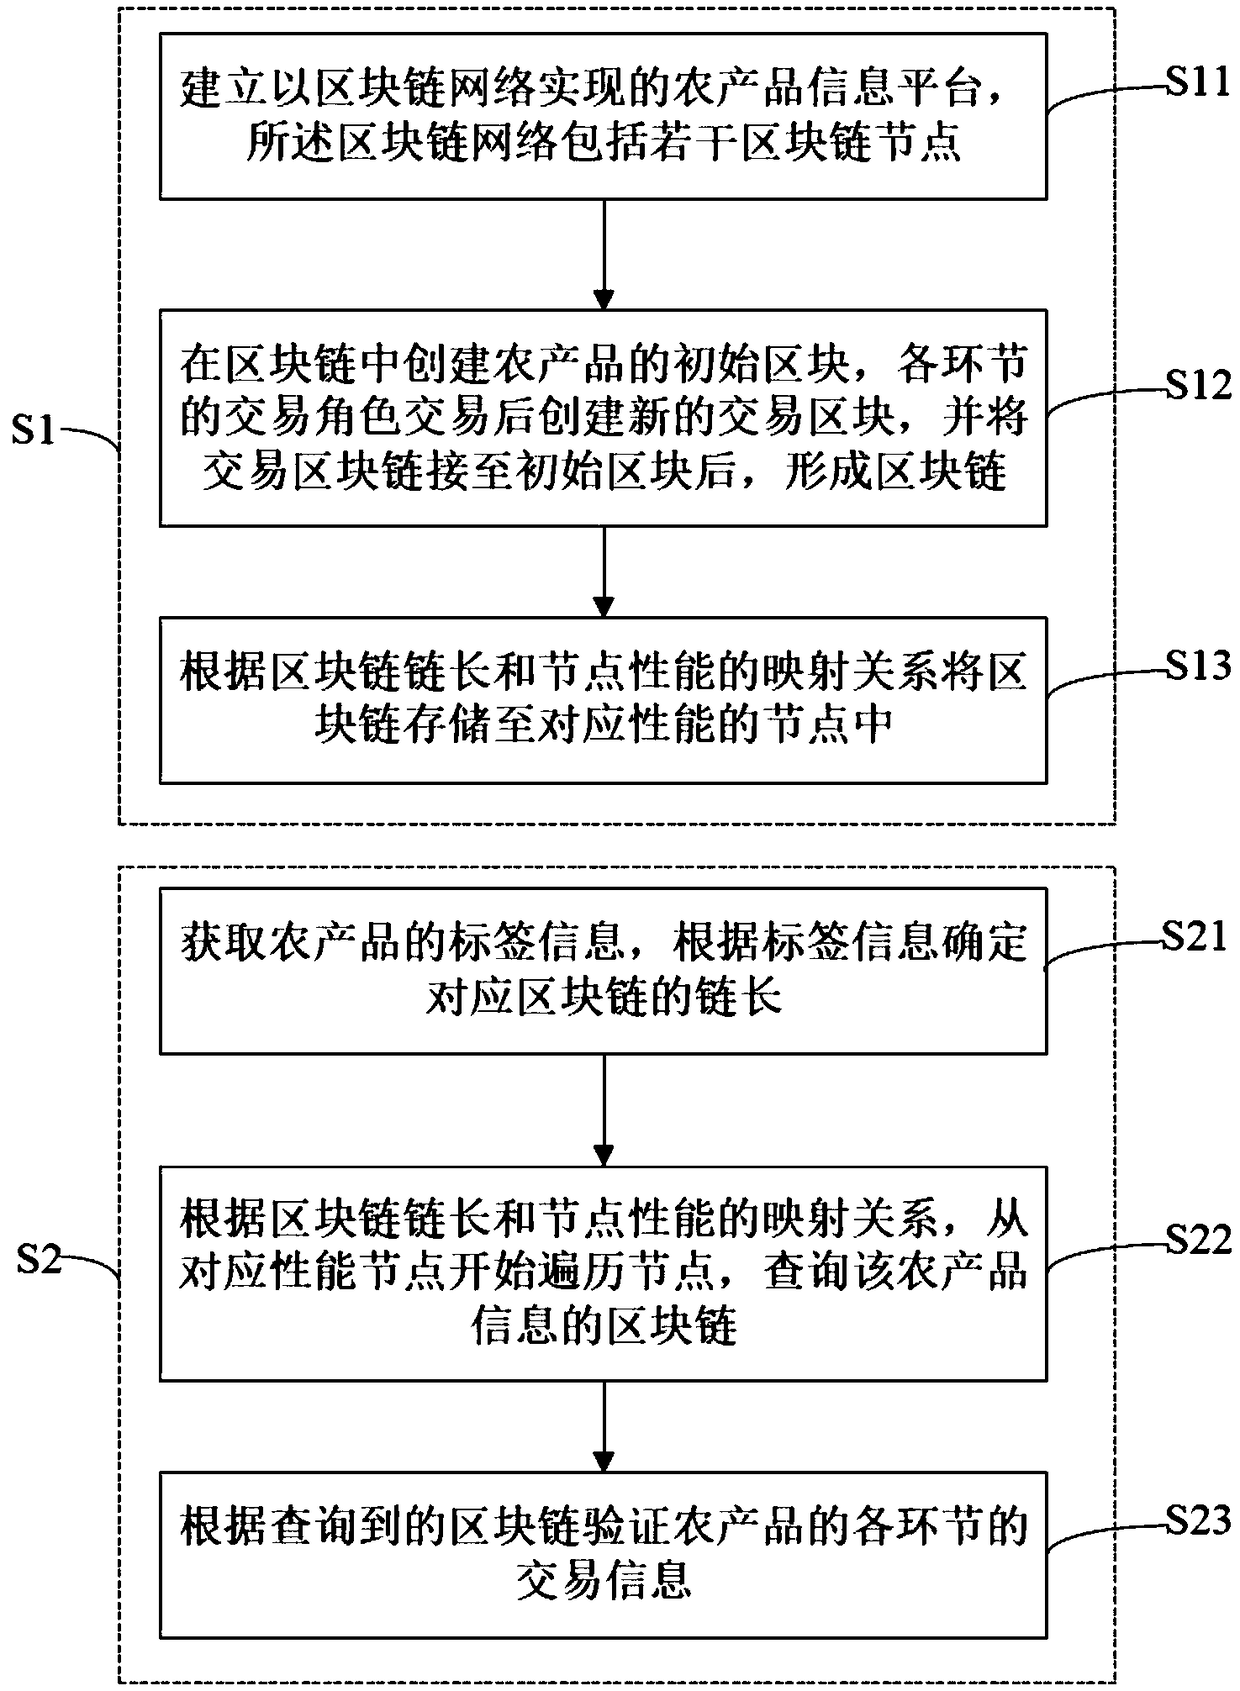 Method and system for traceability verification of agricultural product information based on block chain